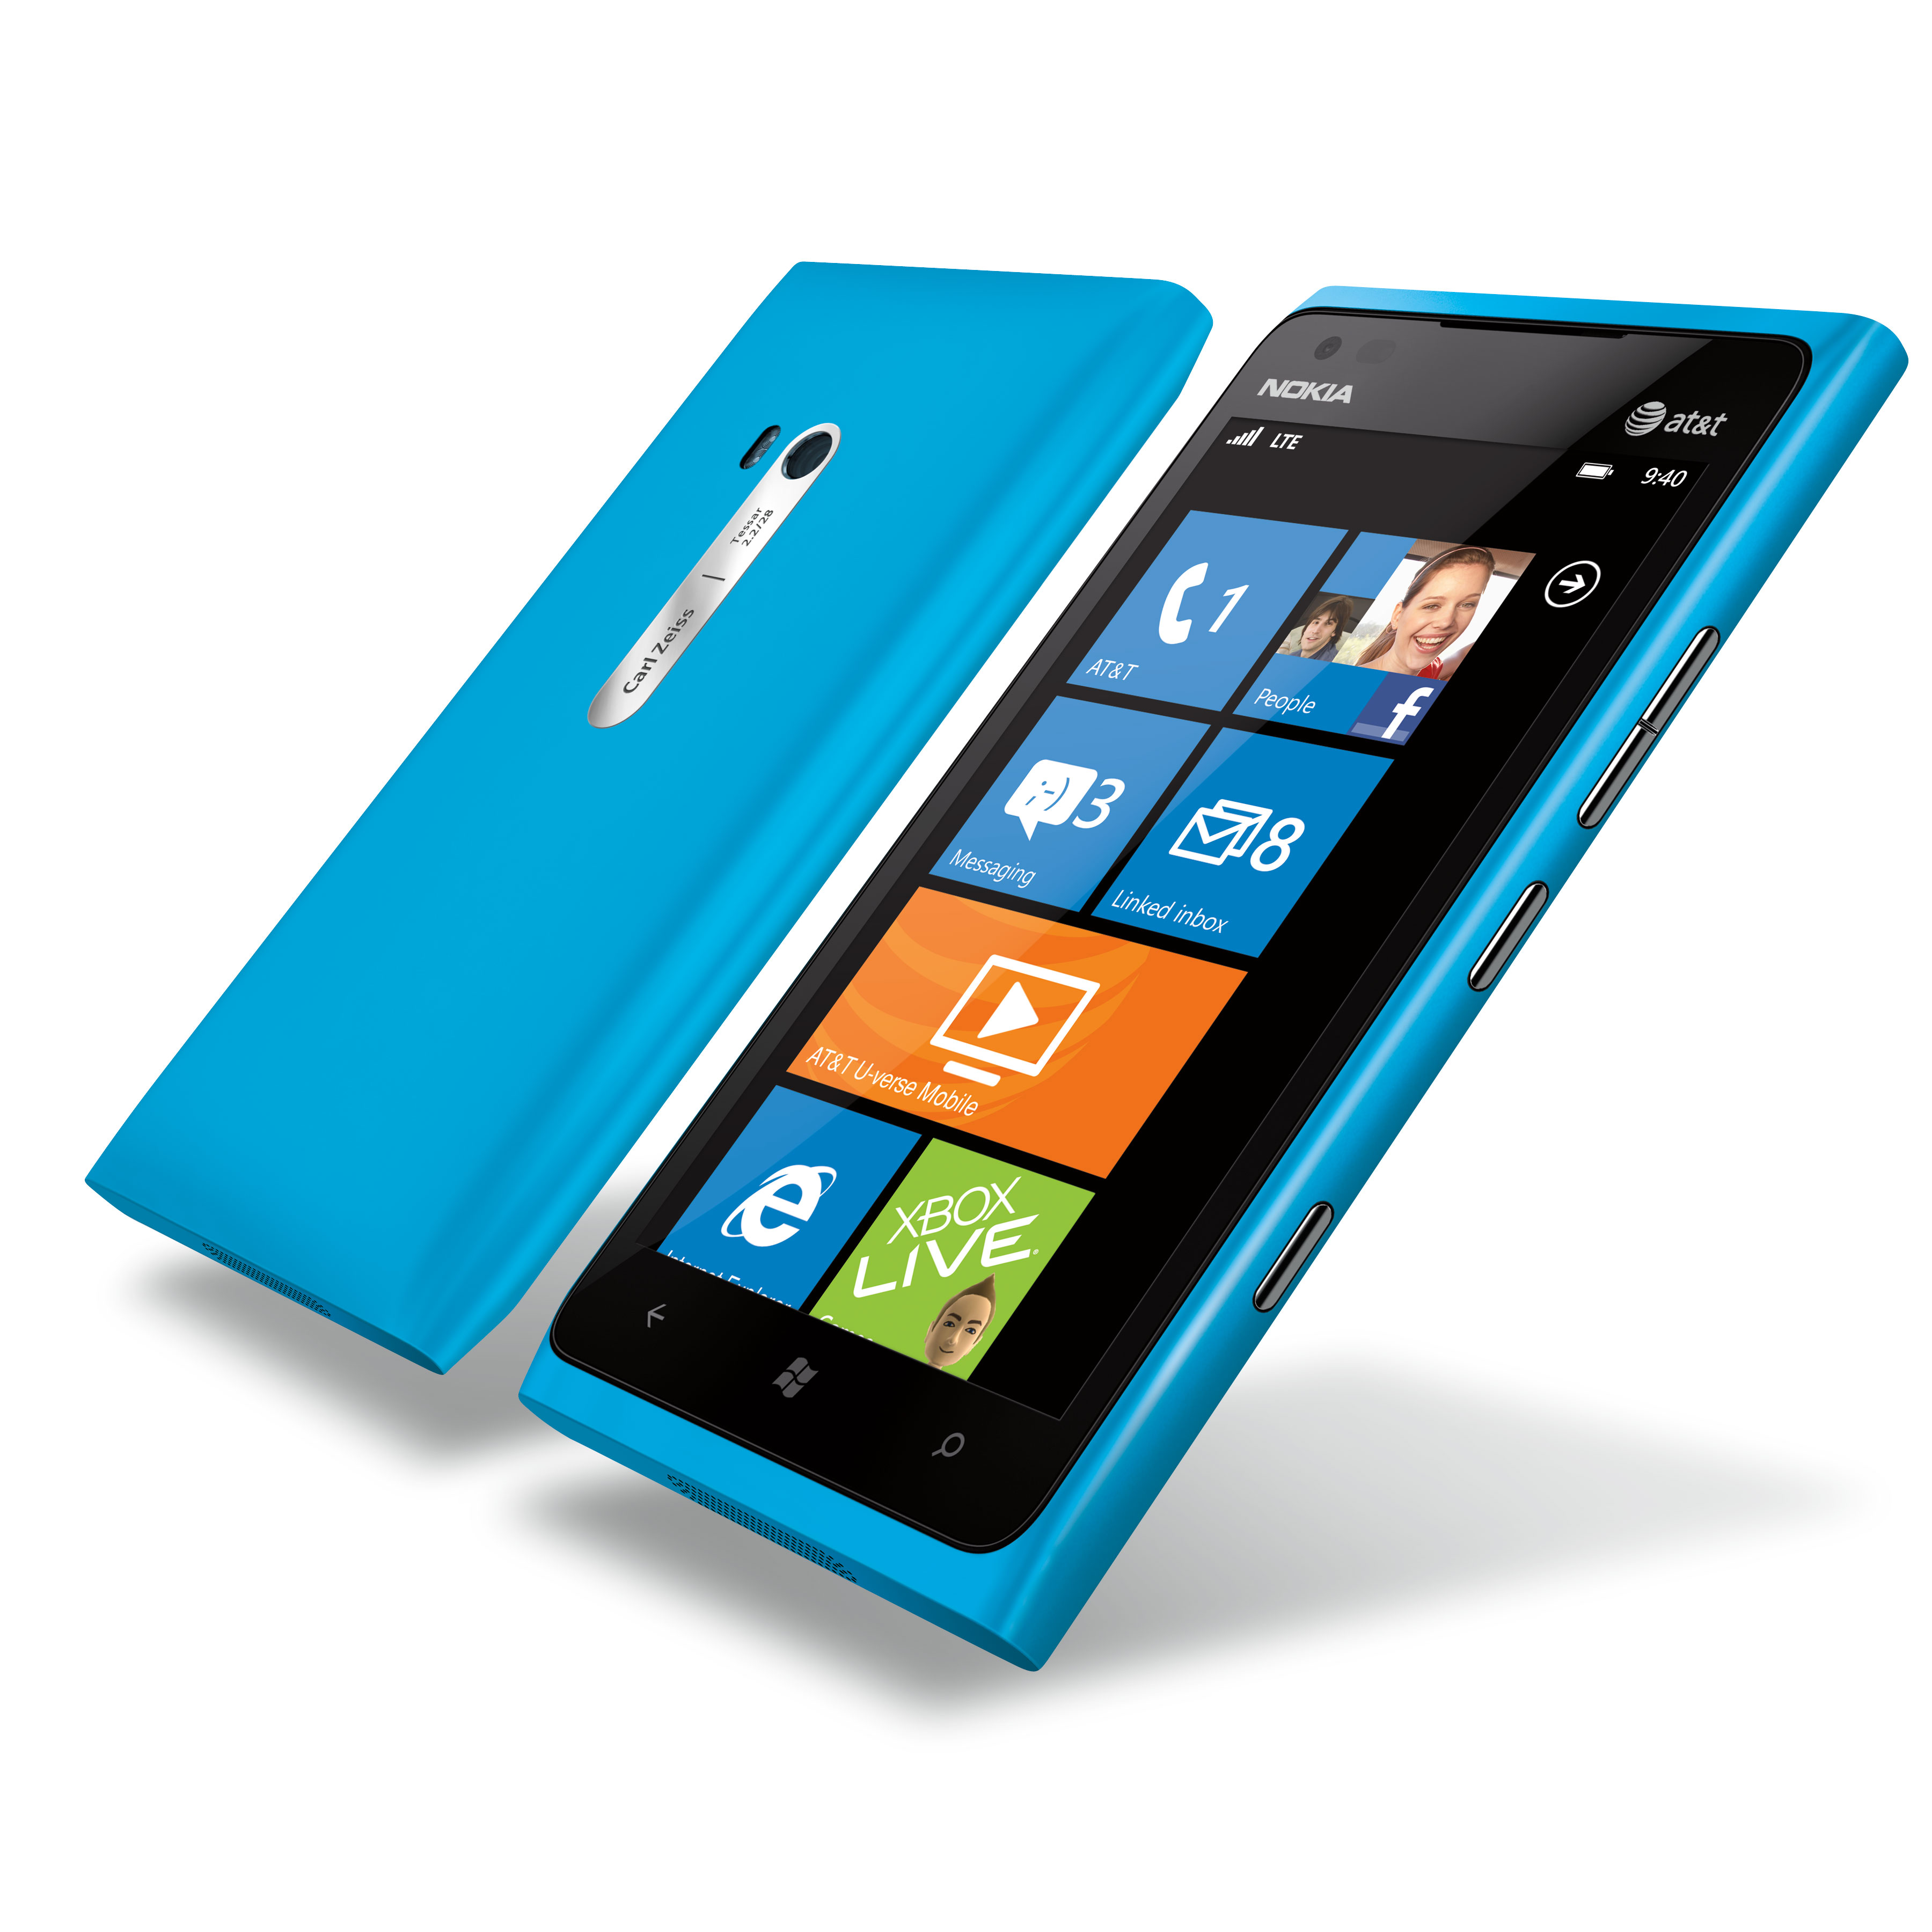 Expectations Windows To Give Phone Boost Wp7 Connect